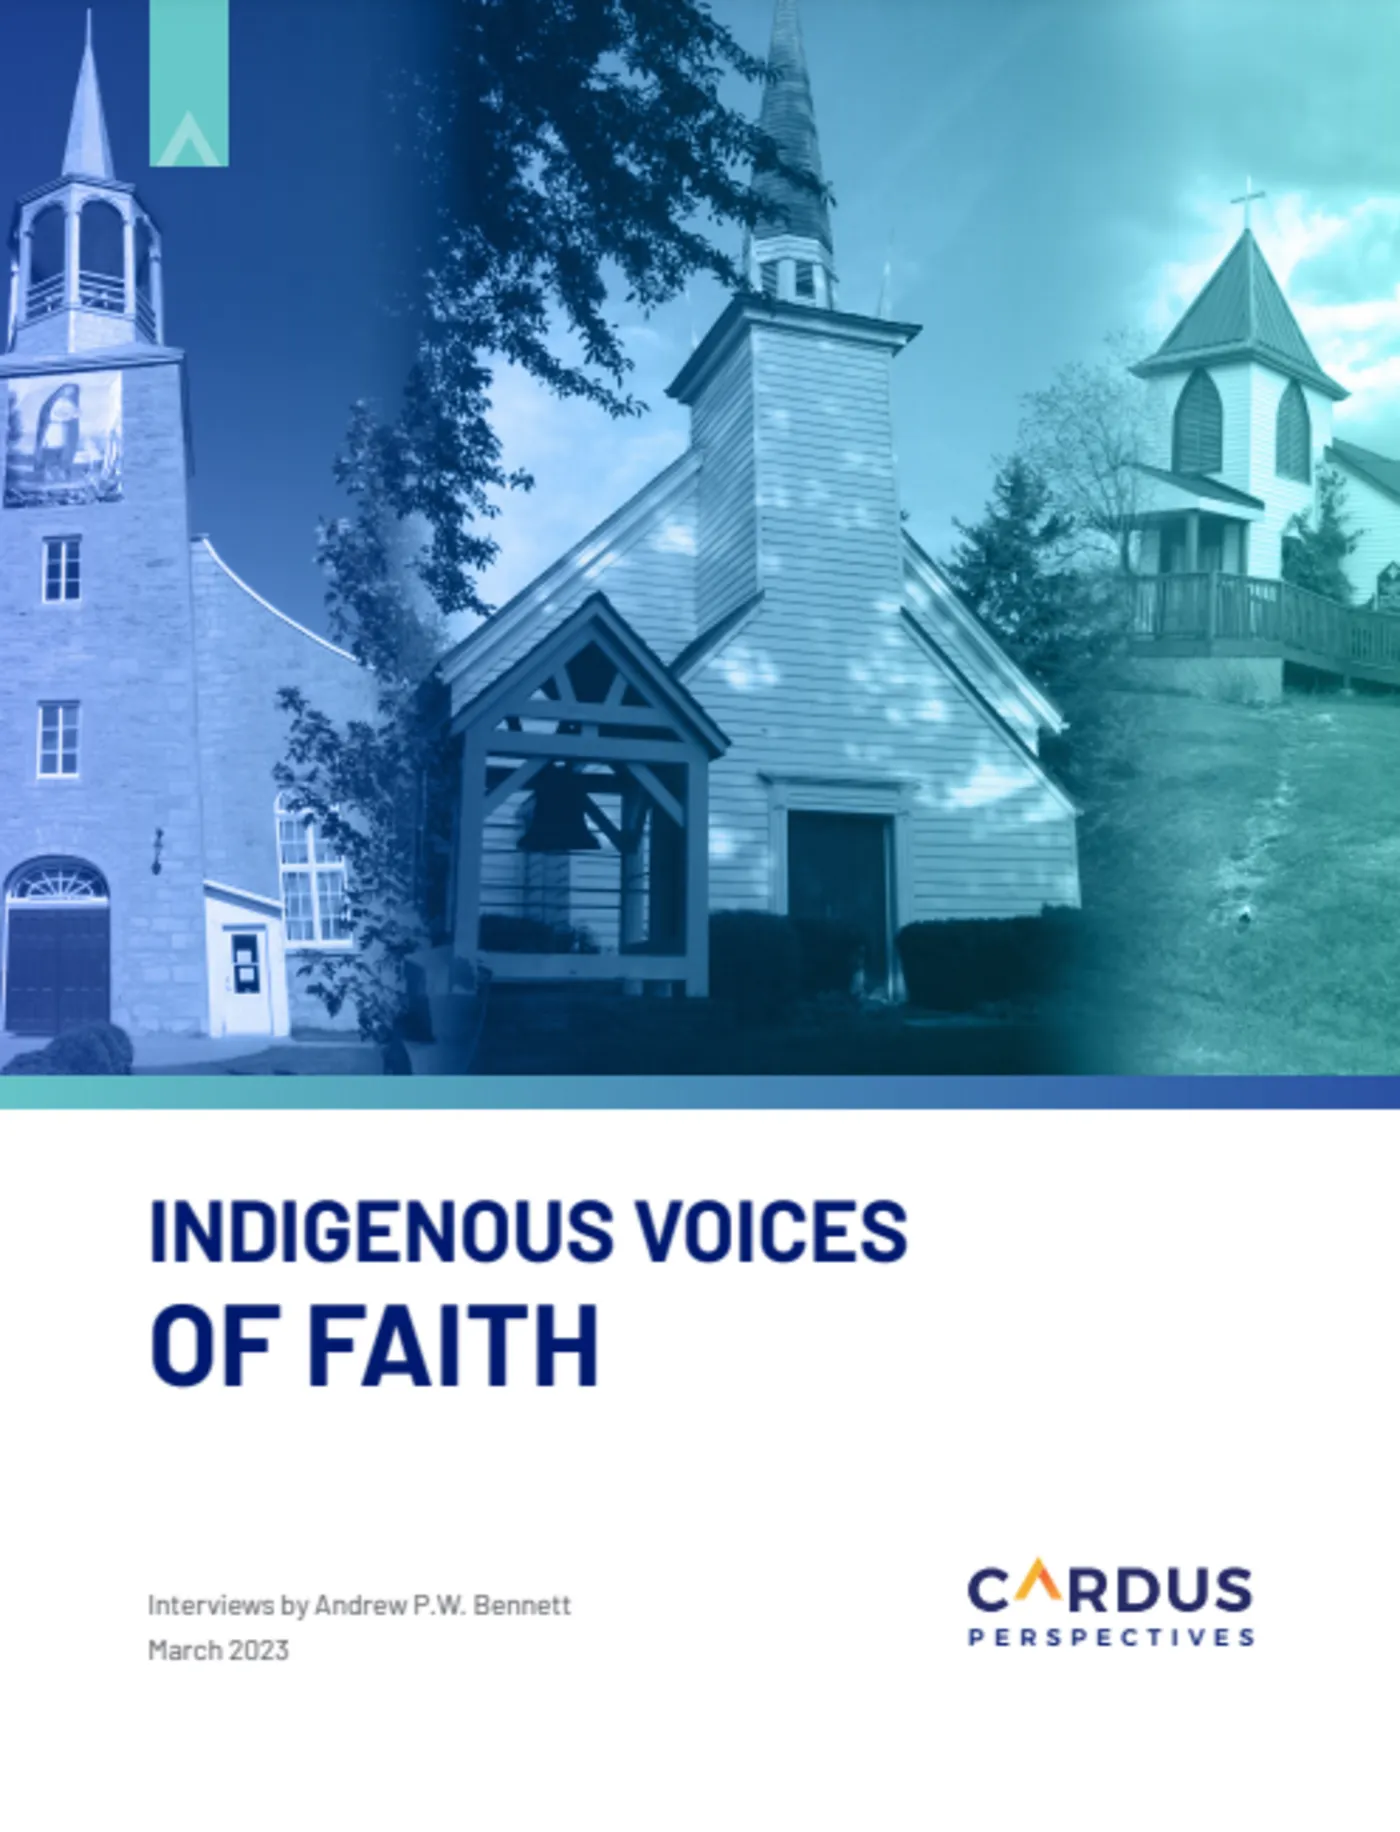 In a new report, Cardus wants to “amplify the voices of Indigenous Canadians speaking for themselves about their religious commitments, which sometimes clash with the typical public presentation of Indigenous spirituality.” Photo courtesy of Cardus